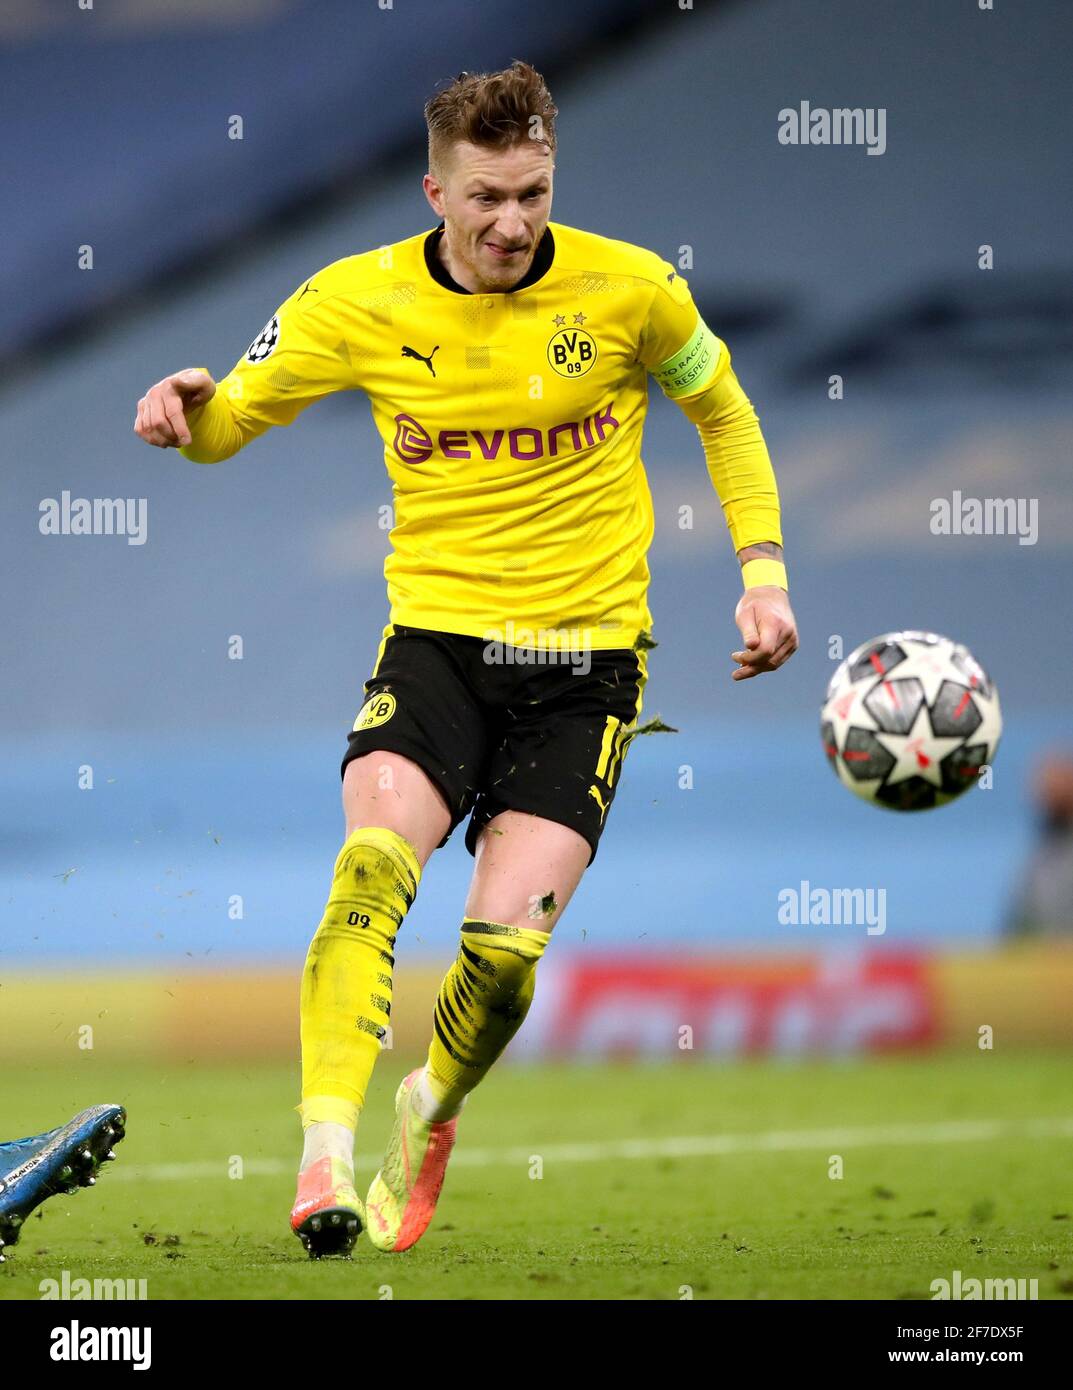 Borussia Dortmund's Marco Reus scores their side's first goal of the game  during the UEFA Champions League match at the Etihad Stadium, Manchester.  Picture date: Tuesday April 6, 2021 Stock Photo - Alamy